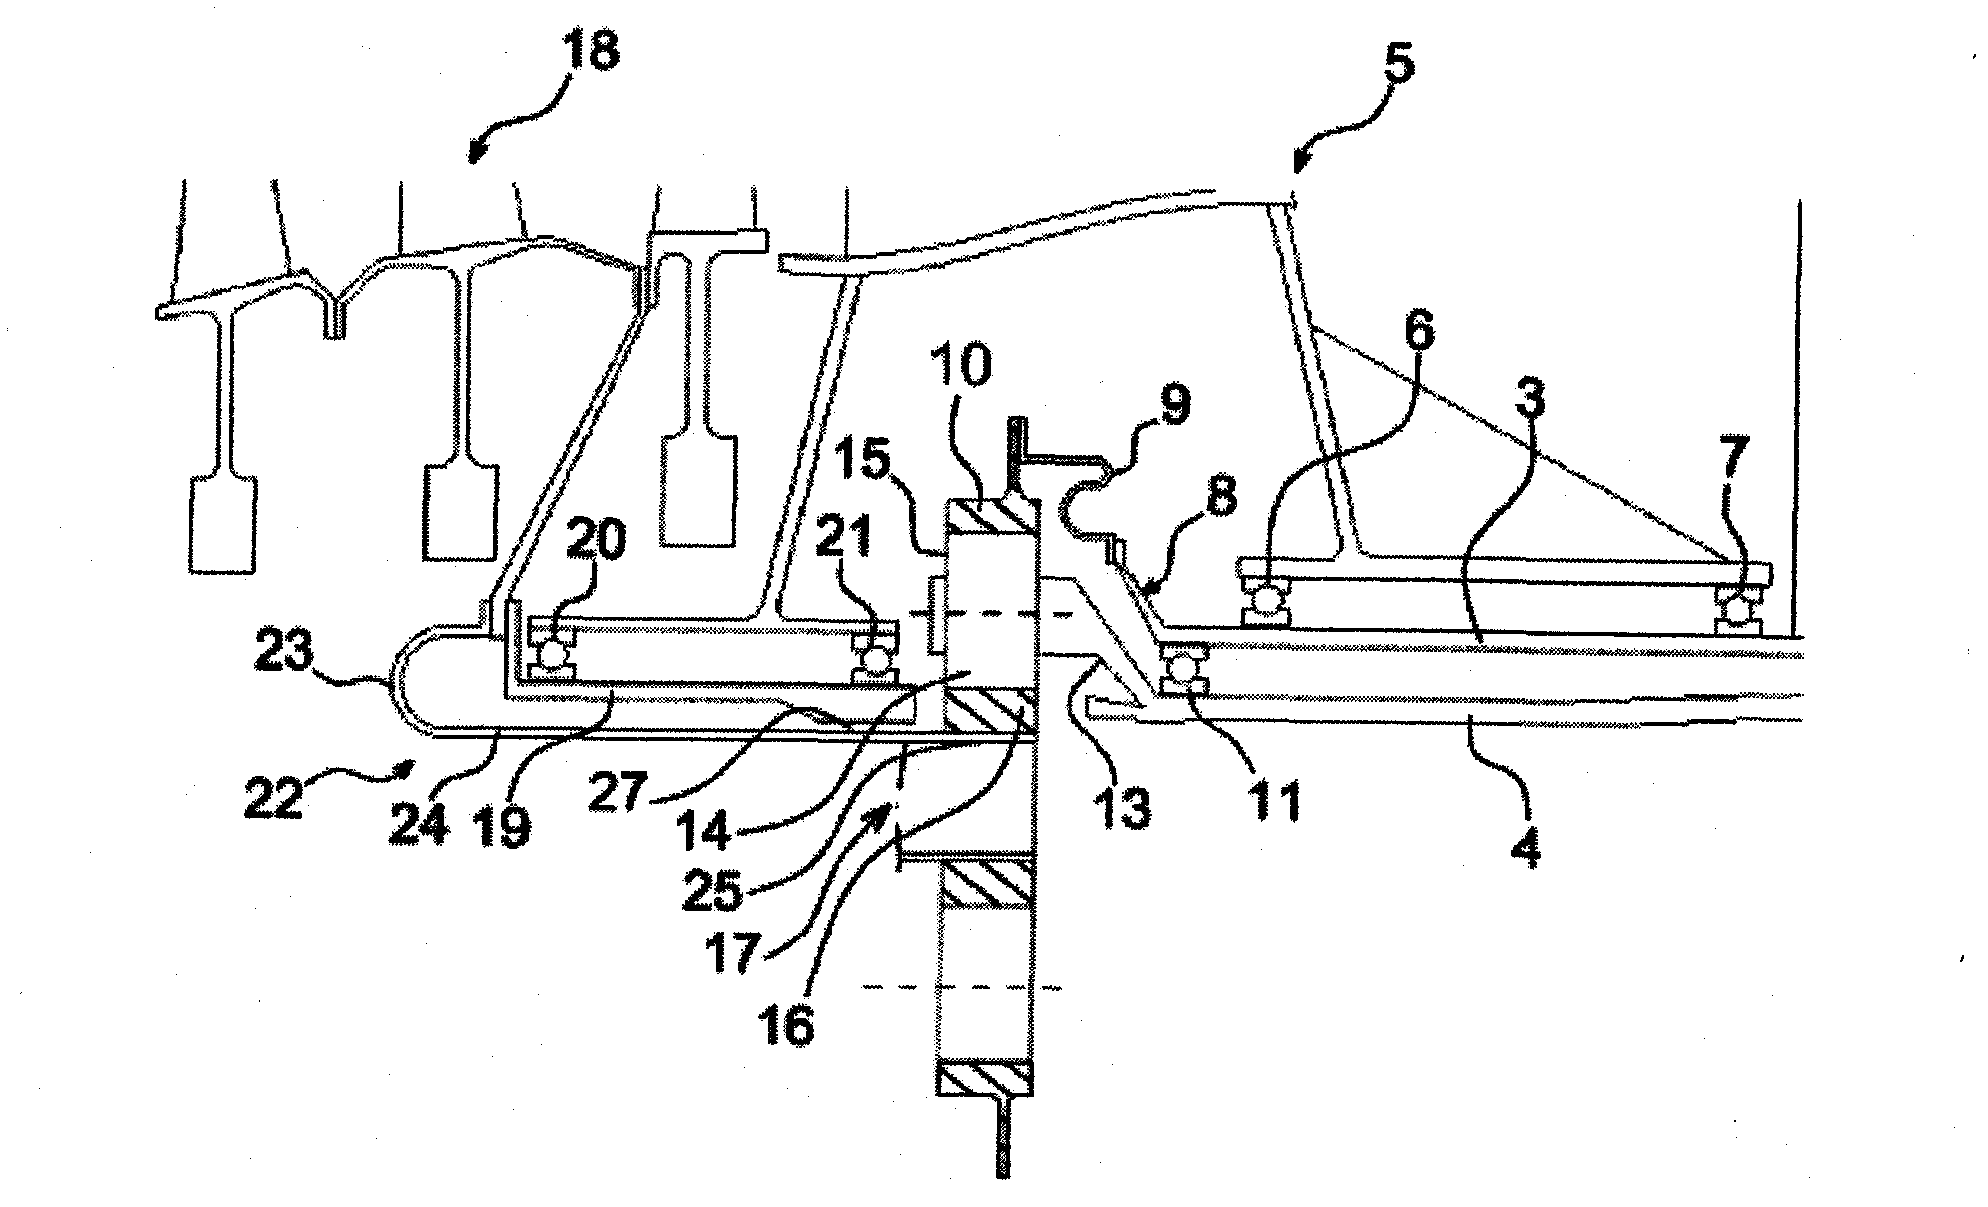 Device for driving a pair of counter-rotating propellers by means of an epicyclic gear train